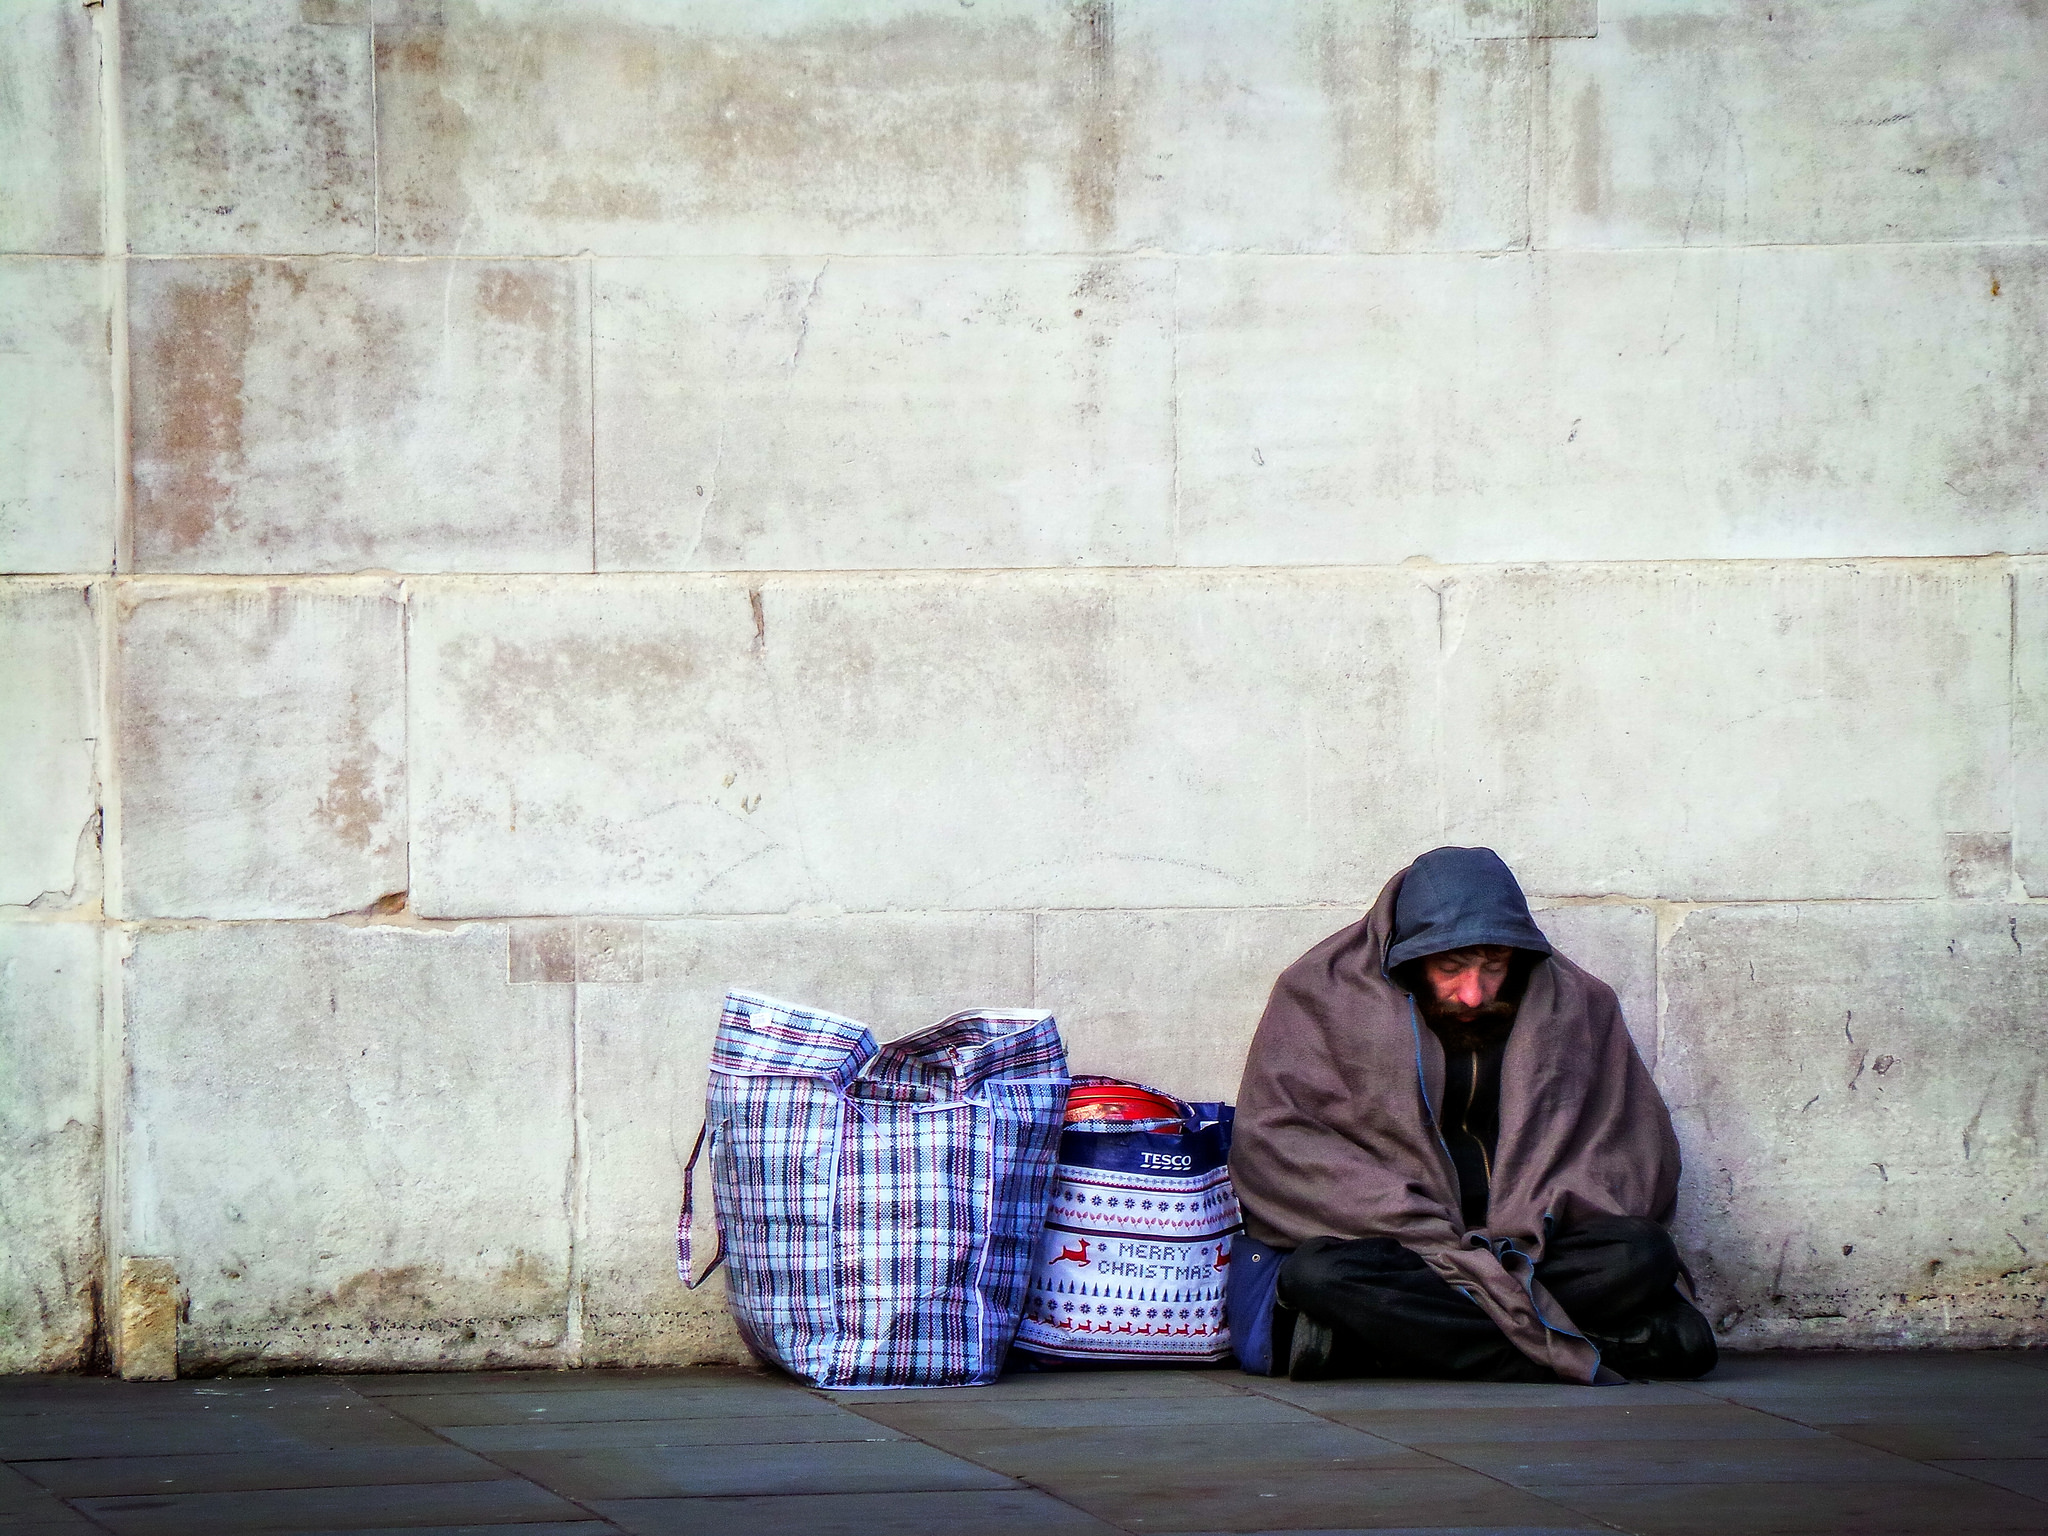 Image: 'Homeless by a Wall', by Garry Knight